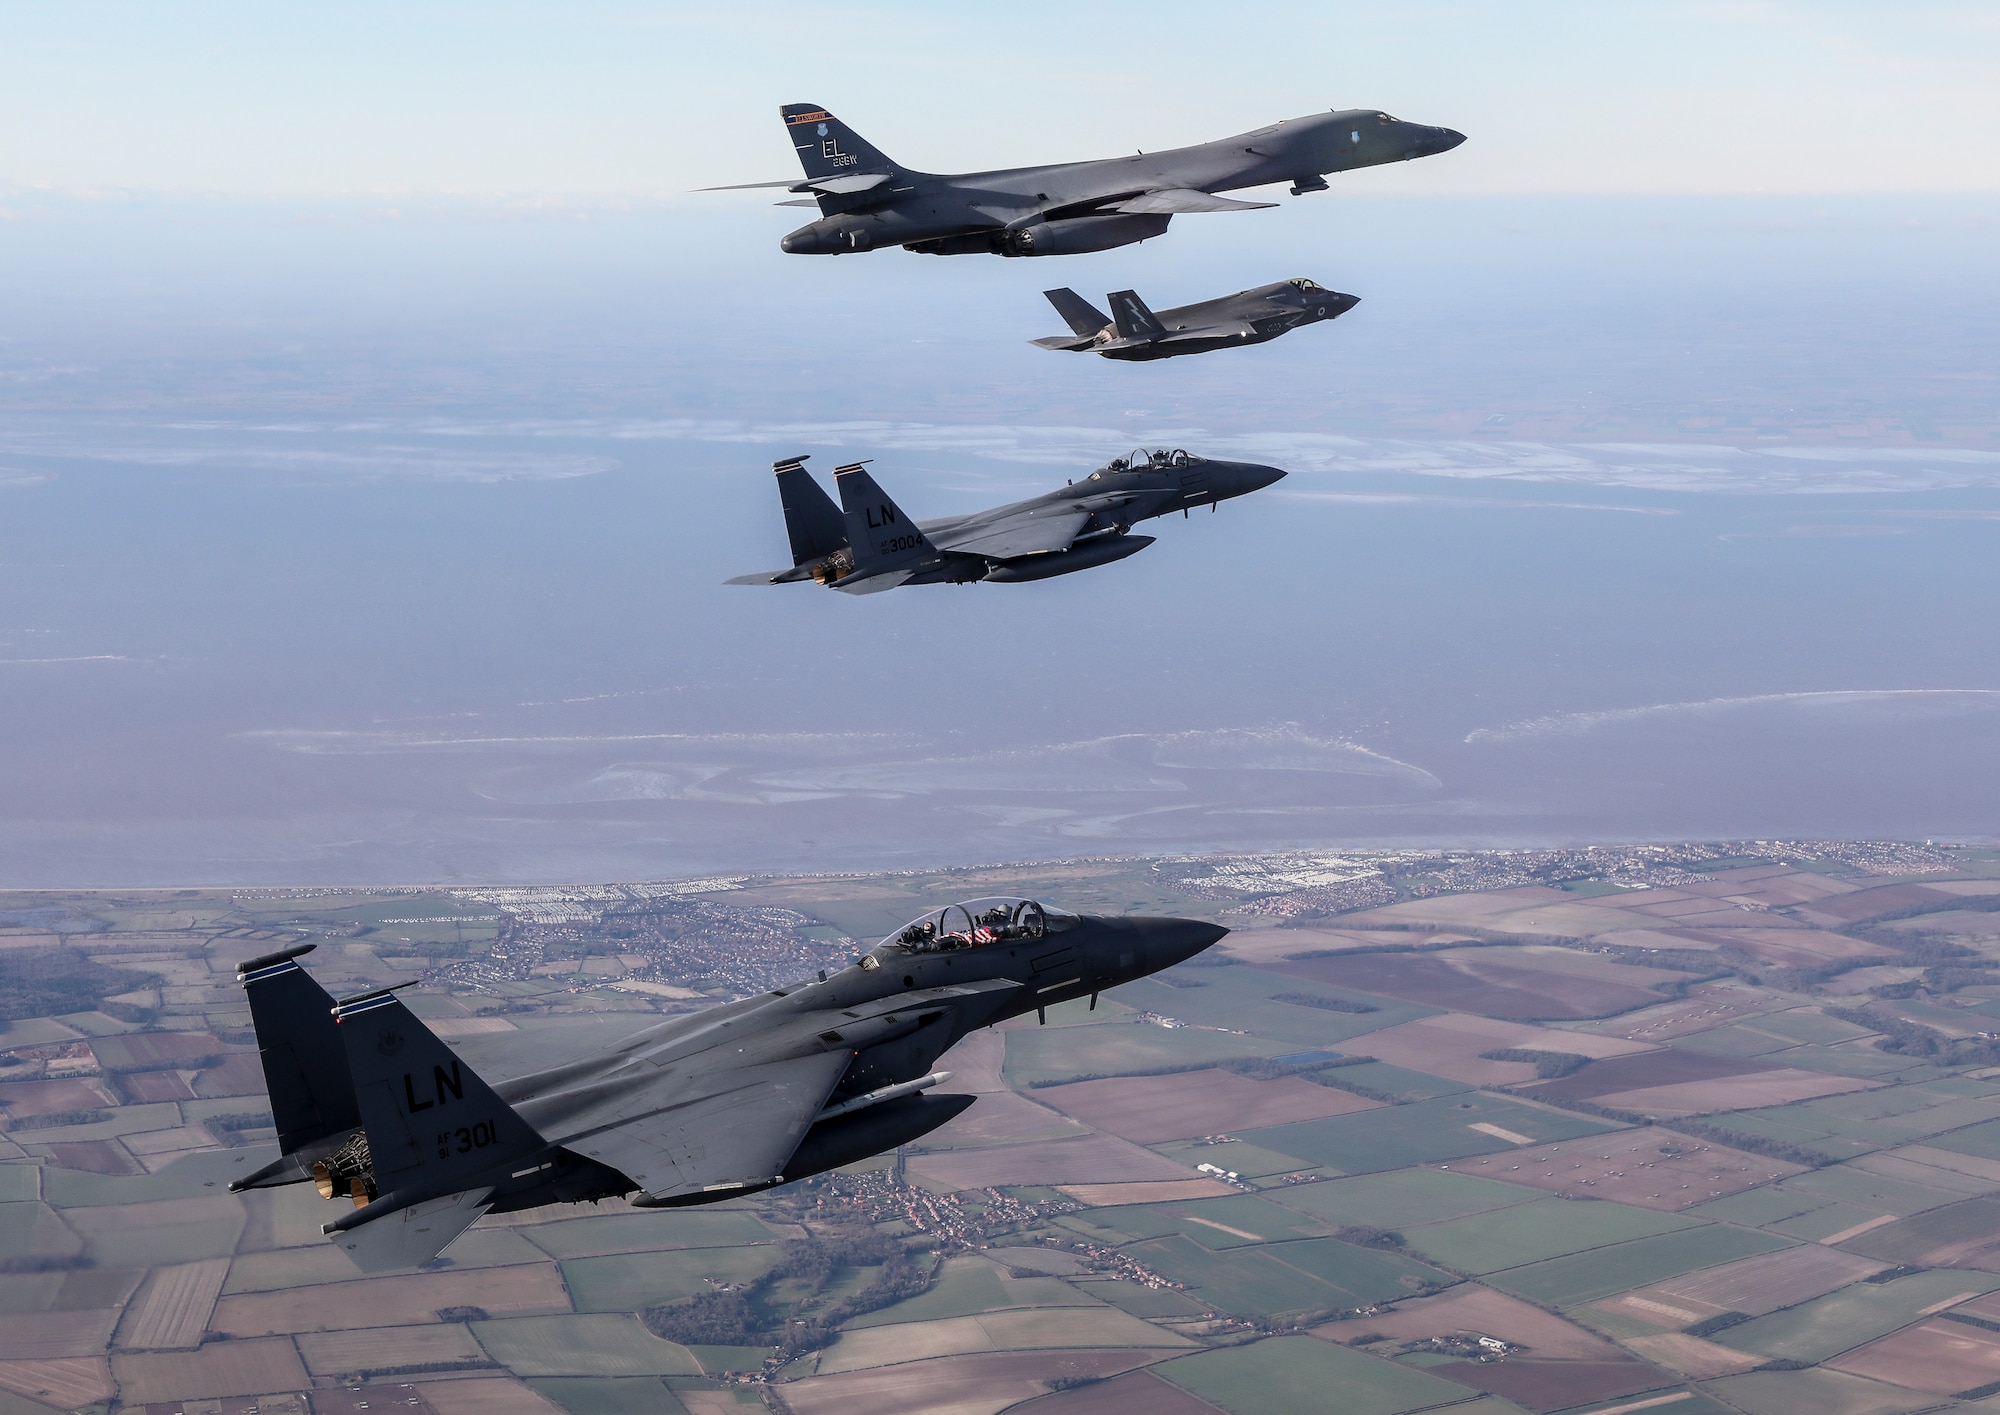 On 01 February 2022, F35B aircraft from Royal Air Force Marham joined US Air Force B1B and F15 aircraft for multiple fly-pasts over the United Kingdom to commemorate the 80th anniversary of the Eighth Air Force.

The Royal Air Force’s fifth-generation fighter jets joined the X strategic bombers, which had flown directly from the US, and X for the fly-pasts of both RAF Lakenheath and RAF Duxford. The location was pertinent as it was once home to an Eighth Air Force P-51 unit and now hosts the largest air museum in Europe.

Originally stood up on 1st February 1942 at Langley Field, Virginia, VIII Bomber Command moved to England a short while later, first to RAF Daws Hill and later to RAF High Wycombe, the RAF’s Bomber Command, where it established its wartime headquarters in the Wycombe Abbey School. The Eighth Air Force was a US Army Air Force Combat Air Force, focused on the European Theatre, that carried out strategic bombing of targets in France, the Low Countries and Germany.

Eighth Air Force and Joint-Global Strike Operations Center commander, Major General. Andrew Gebara said “The Eighth Air Force has a long, rich history that dates back to World War II. Not only does this flight signify the longevity and reach of the United States’ bomber force, but it pays tribute to our UK allies as well. Eighth Air Force has had a close relationship with the Royal Air Force since its beginning.”

On 22nd February 1944, the US reorganised its Air Forces in Europe by renaming Eighth Air Force as the United States Strategic Air Forces in Europe, which is today known as United States Air Forces in Europe.